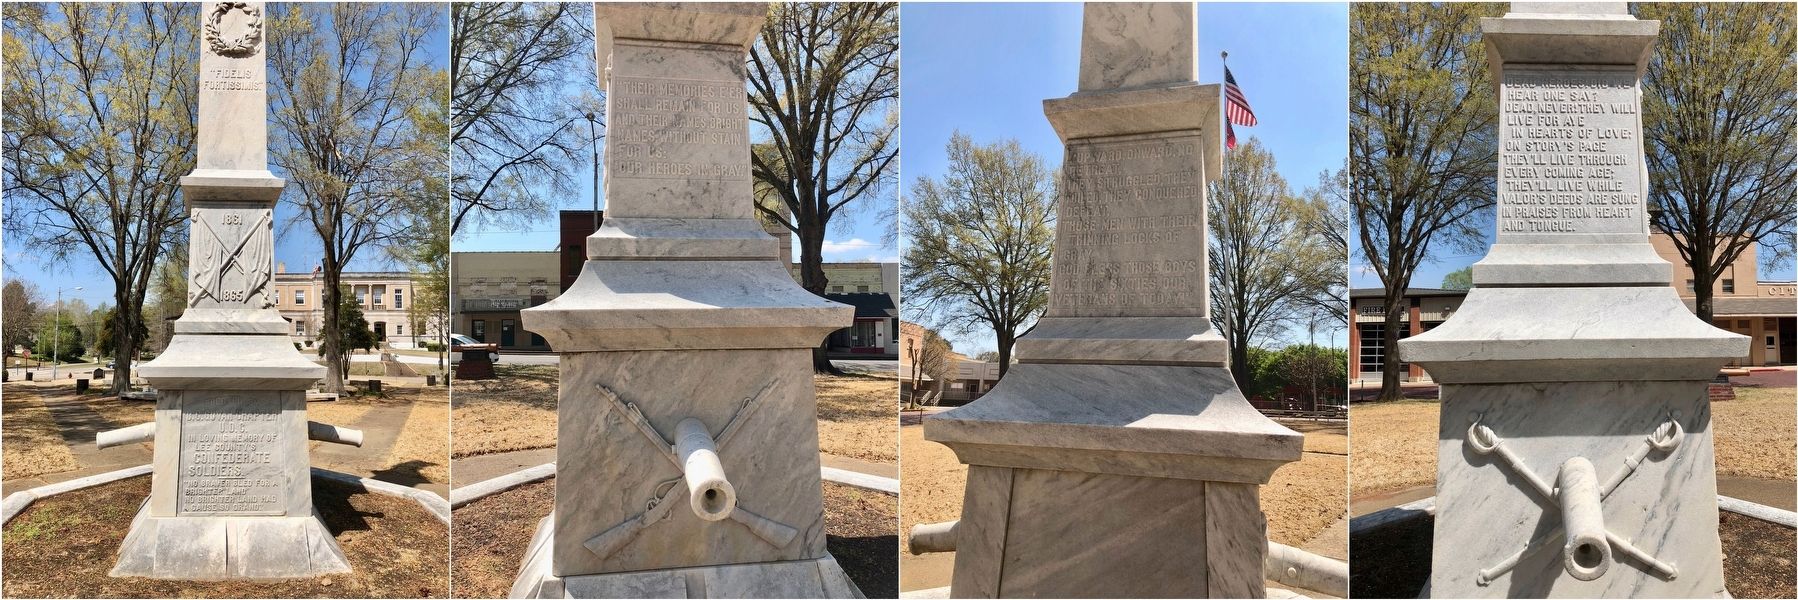 Lee County Confederate Monument (South / East / North / West) image. Click for full size.